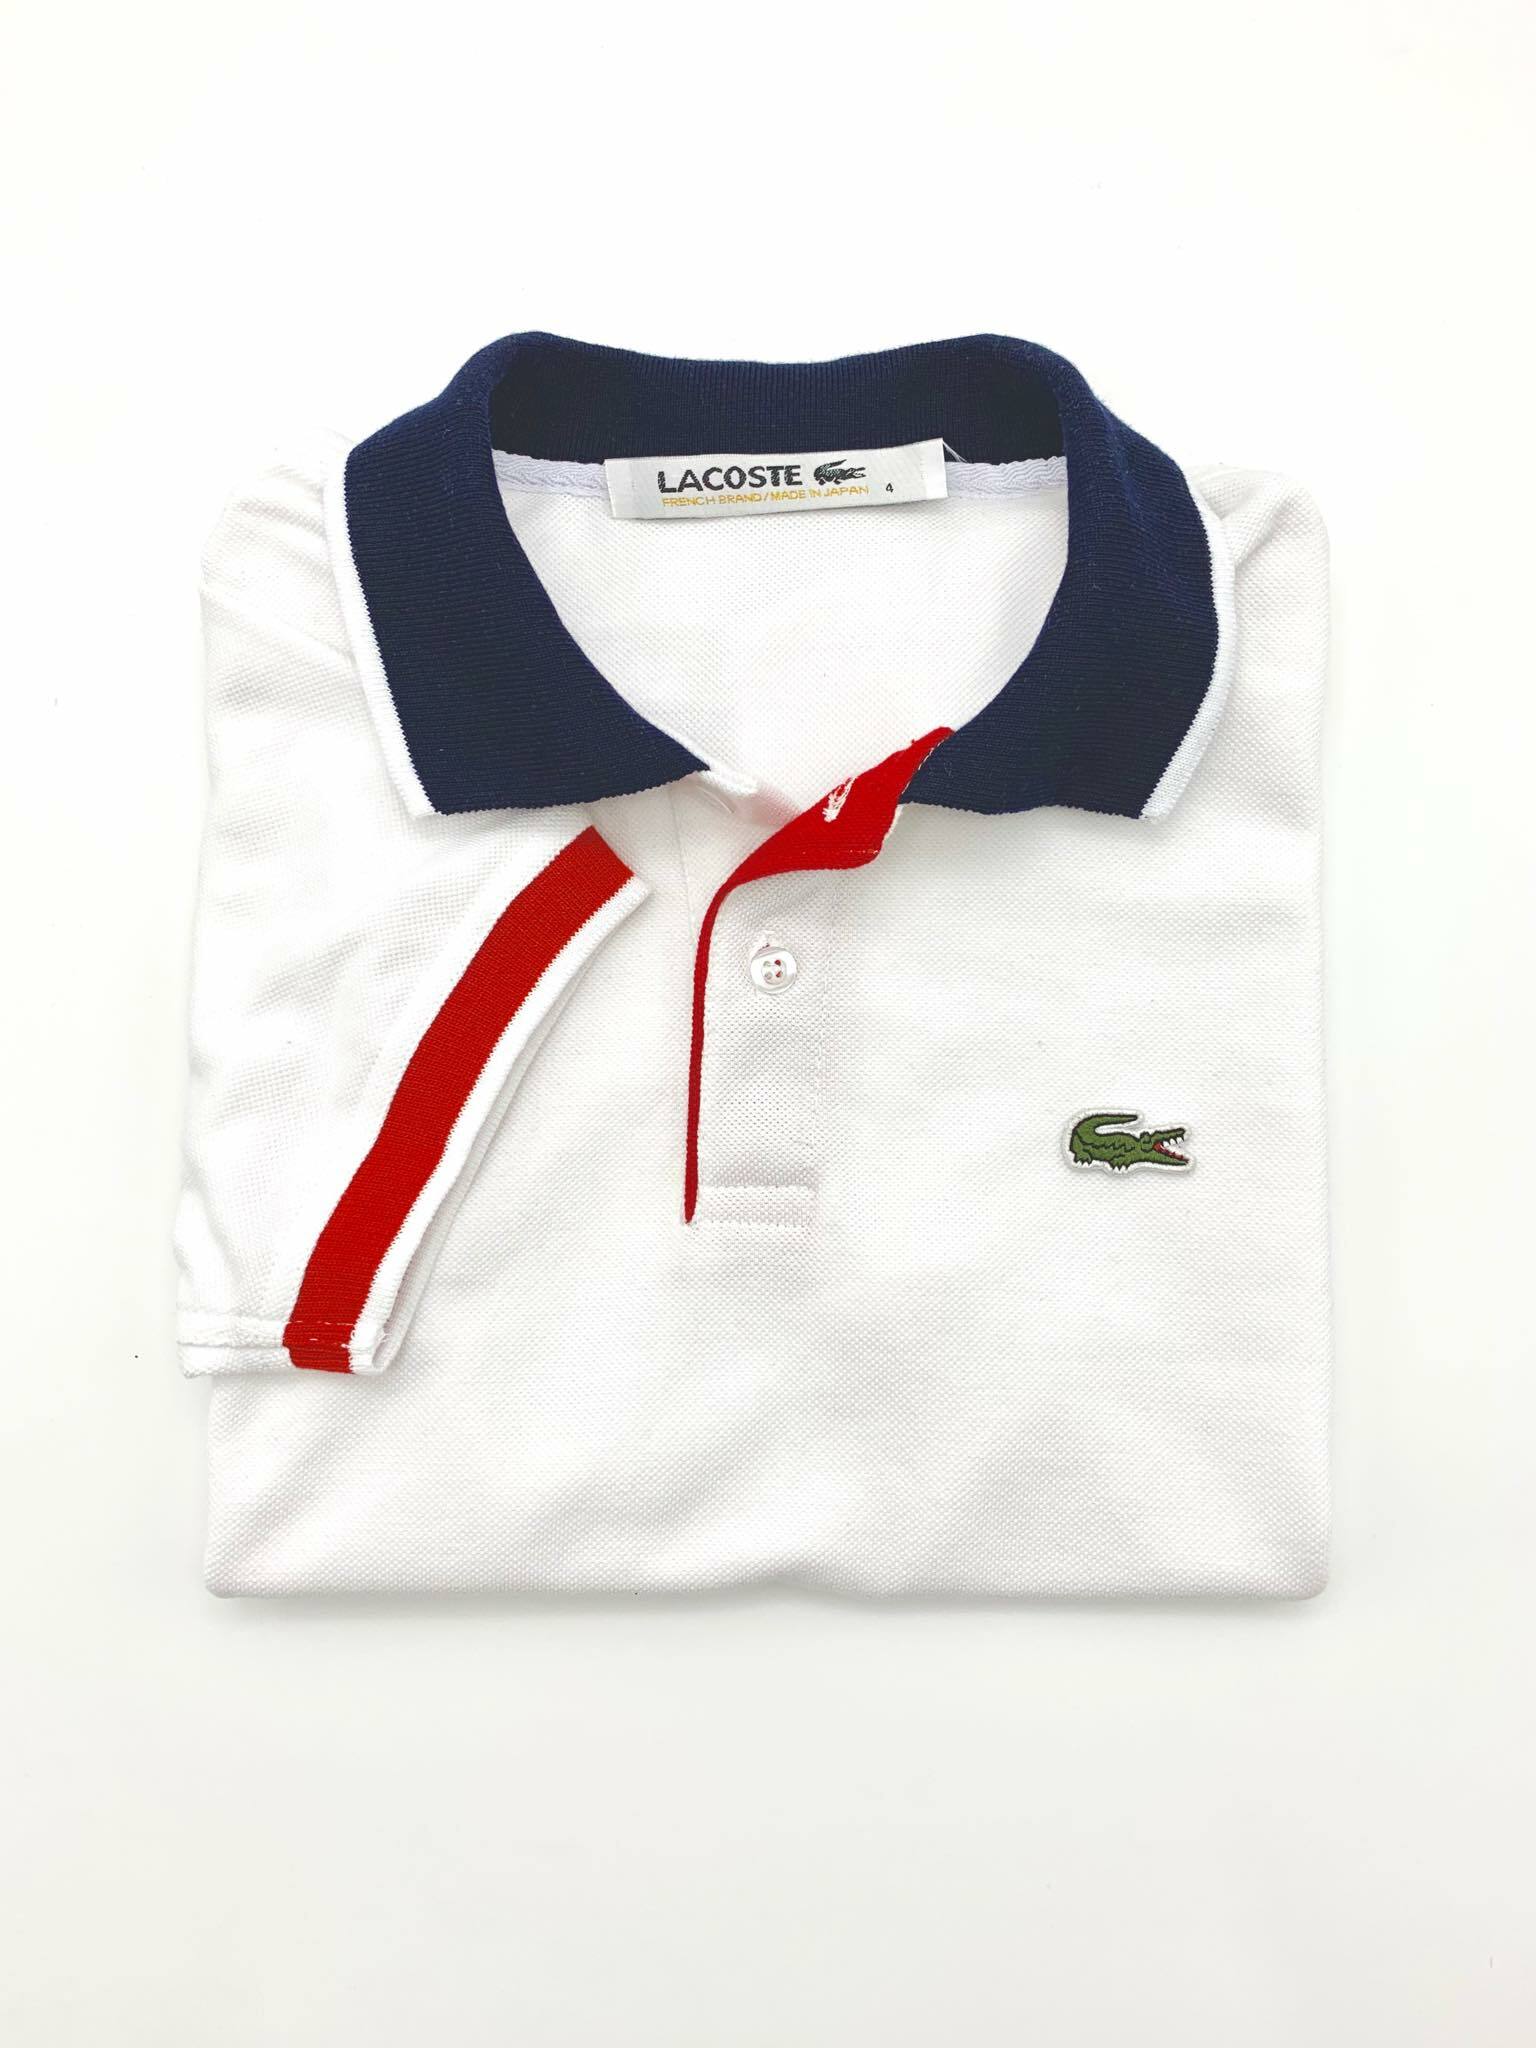 Men's Lacoste Polo Shirt w/Red CC + 